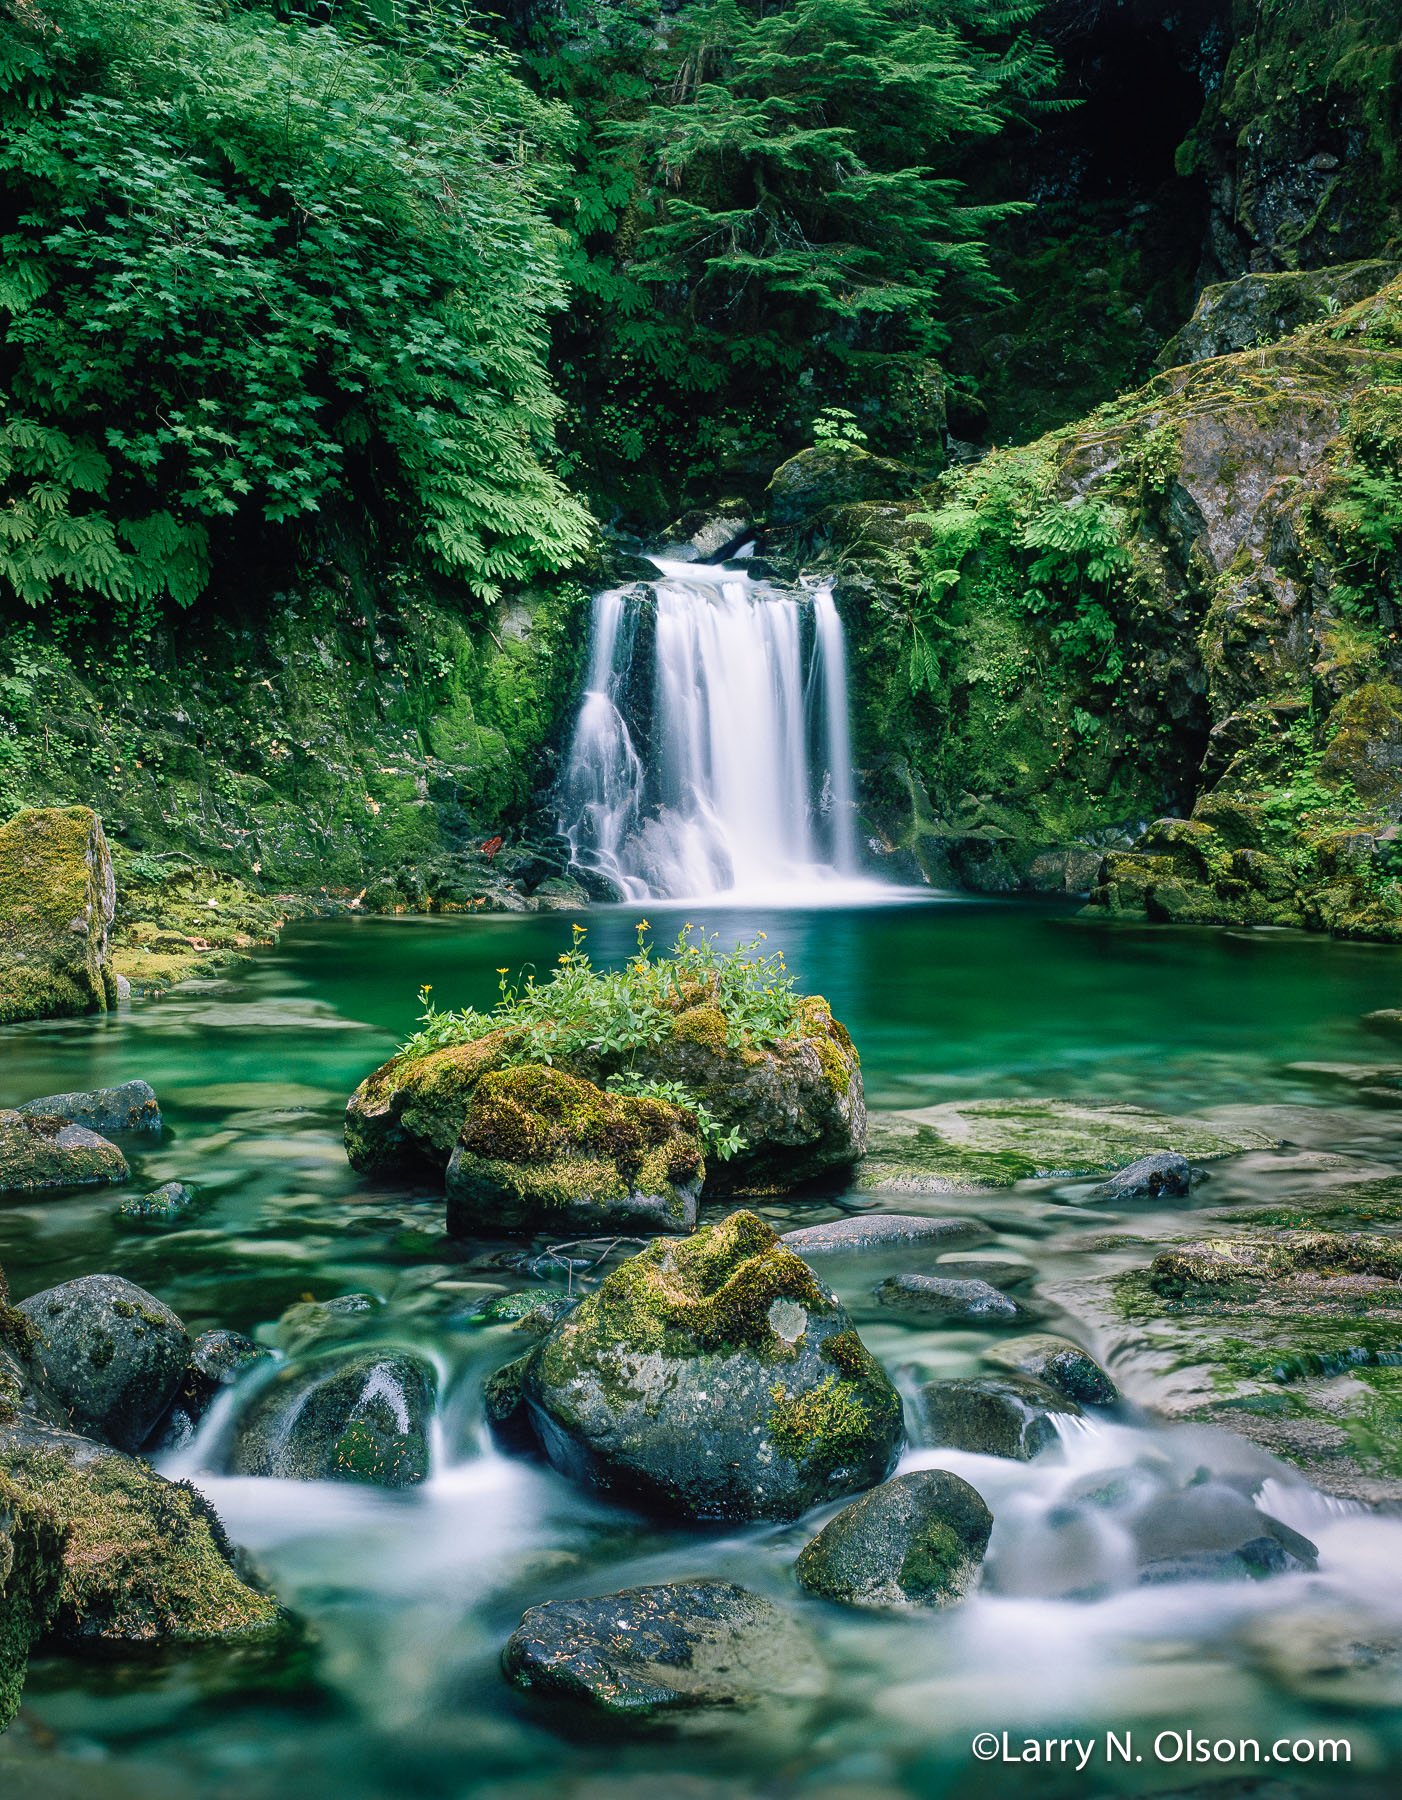 Opal Creek Wilderness , Willamette National Forest , OR | A small waterfall has created a verdant riparian zone and pool in the ancient forest.